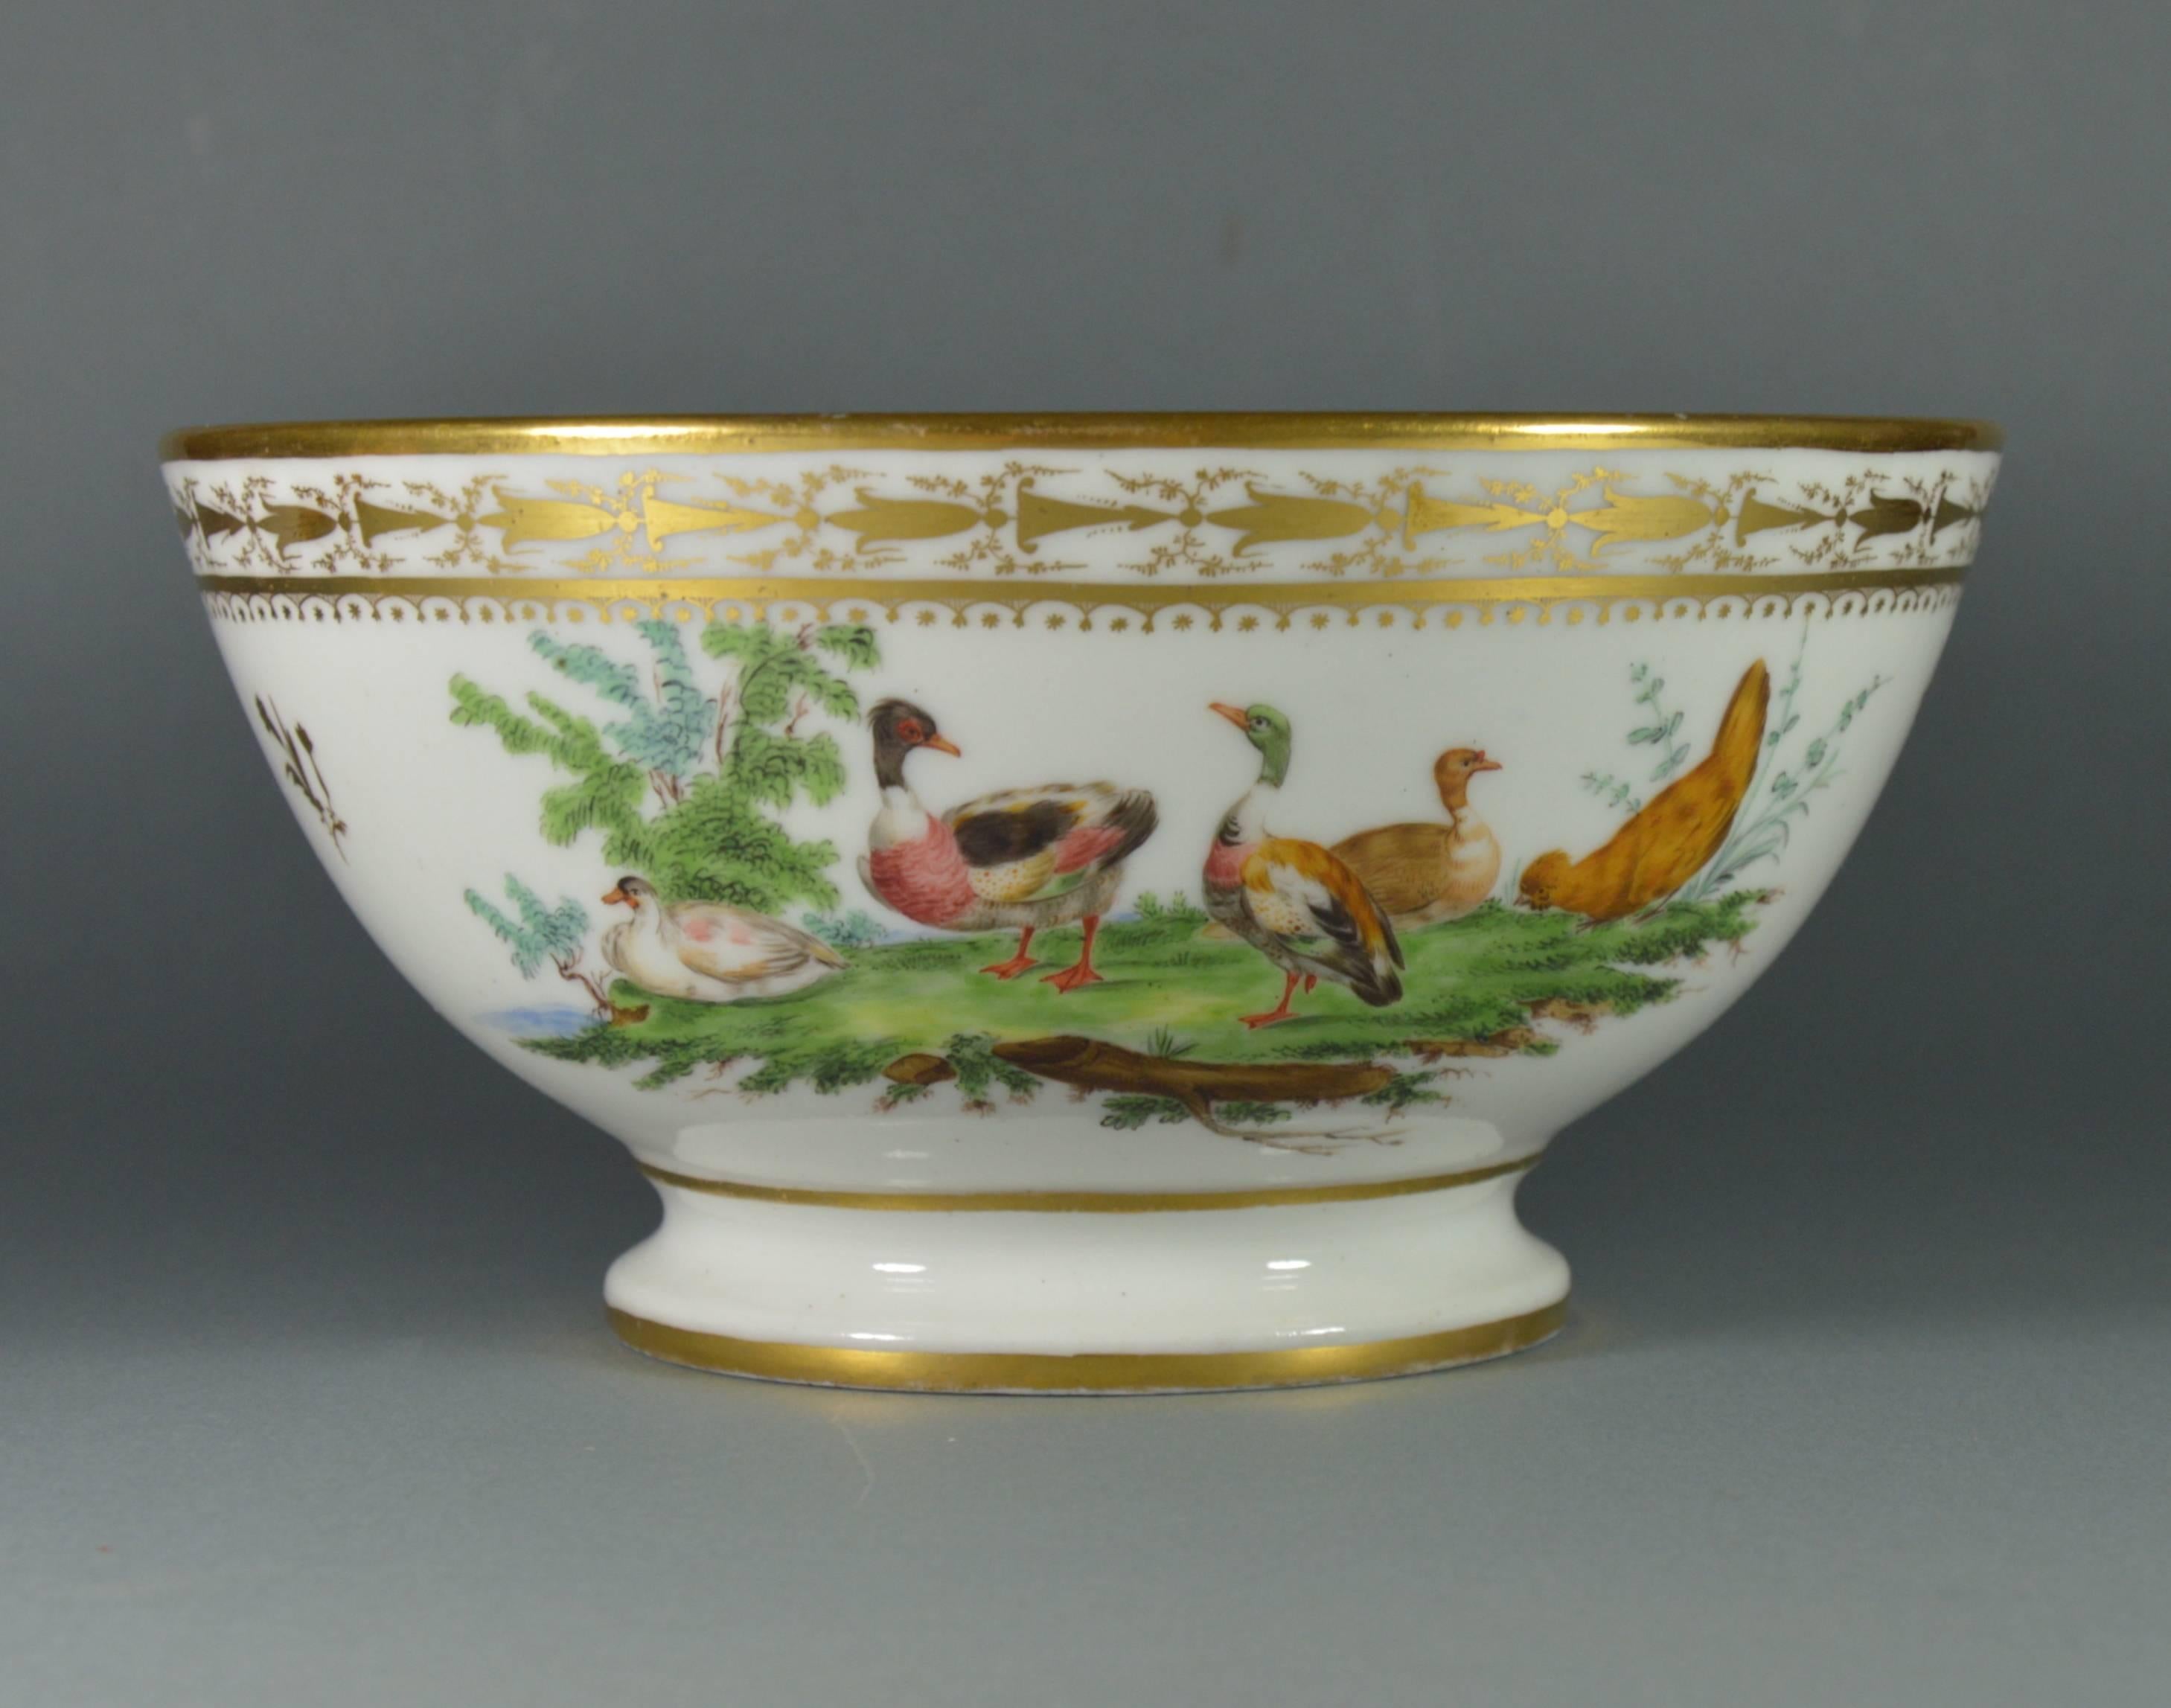 Old Brussels porcelain slop bowl attributed to Louis Cretté manufacture (1788-1813). Magnificent high-quality polychrome and gilt decoration very typical for Louis Cretté works. The centre face of the bowl is finely-painted with coqs.
Dimensions: Ø